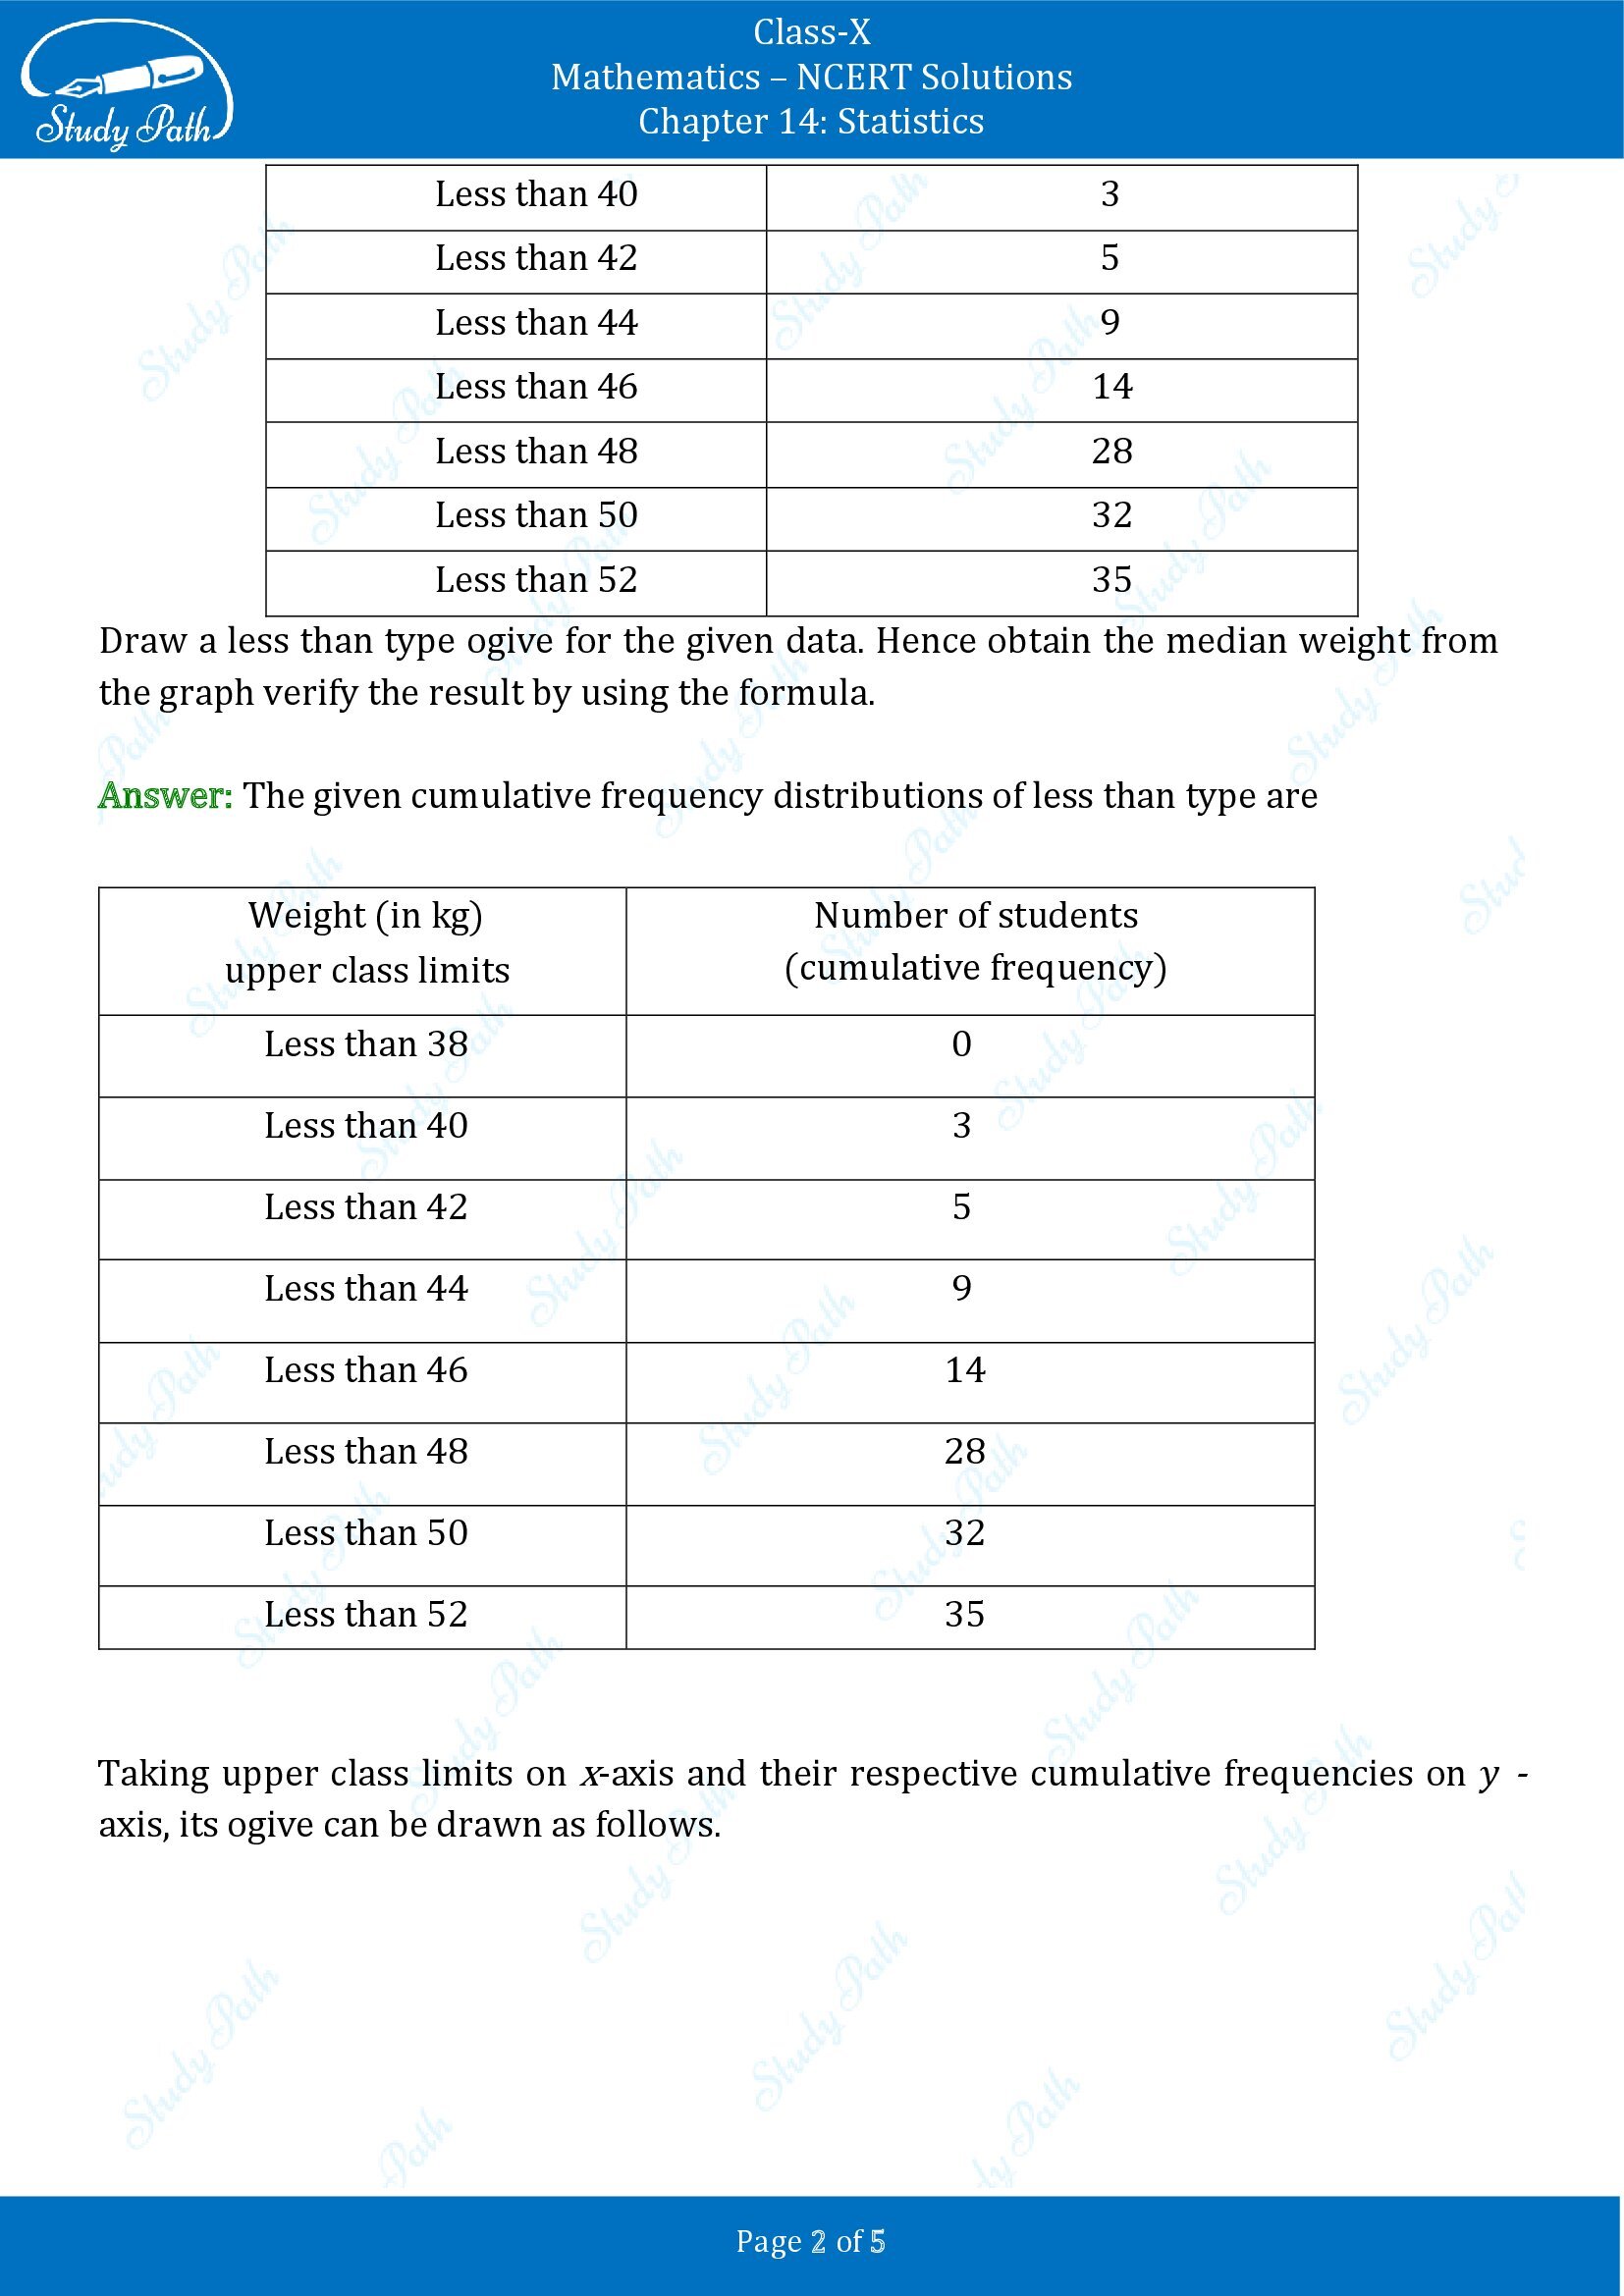 NCERT Solutions for Class 10 Maths Chapter 14 Statistics Exercise 14.4 00002